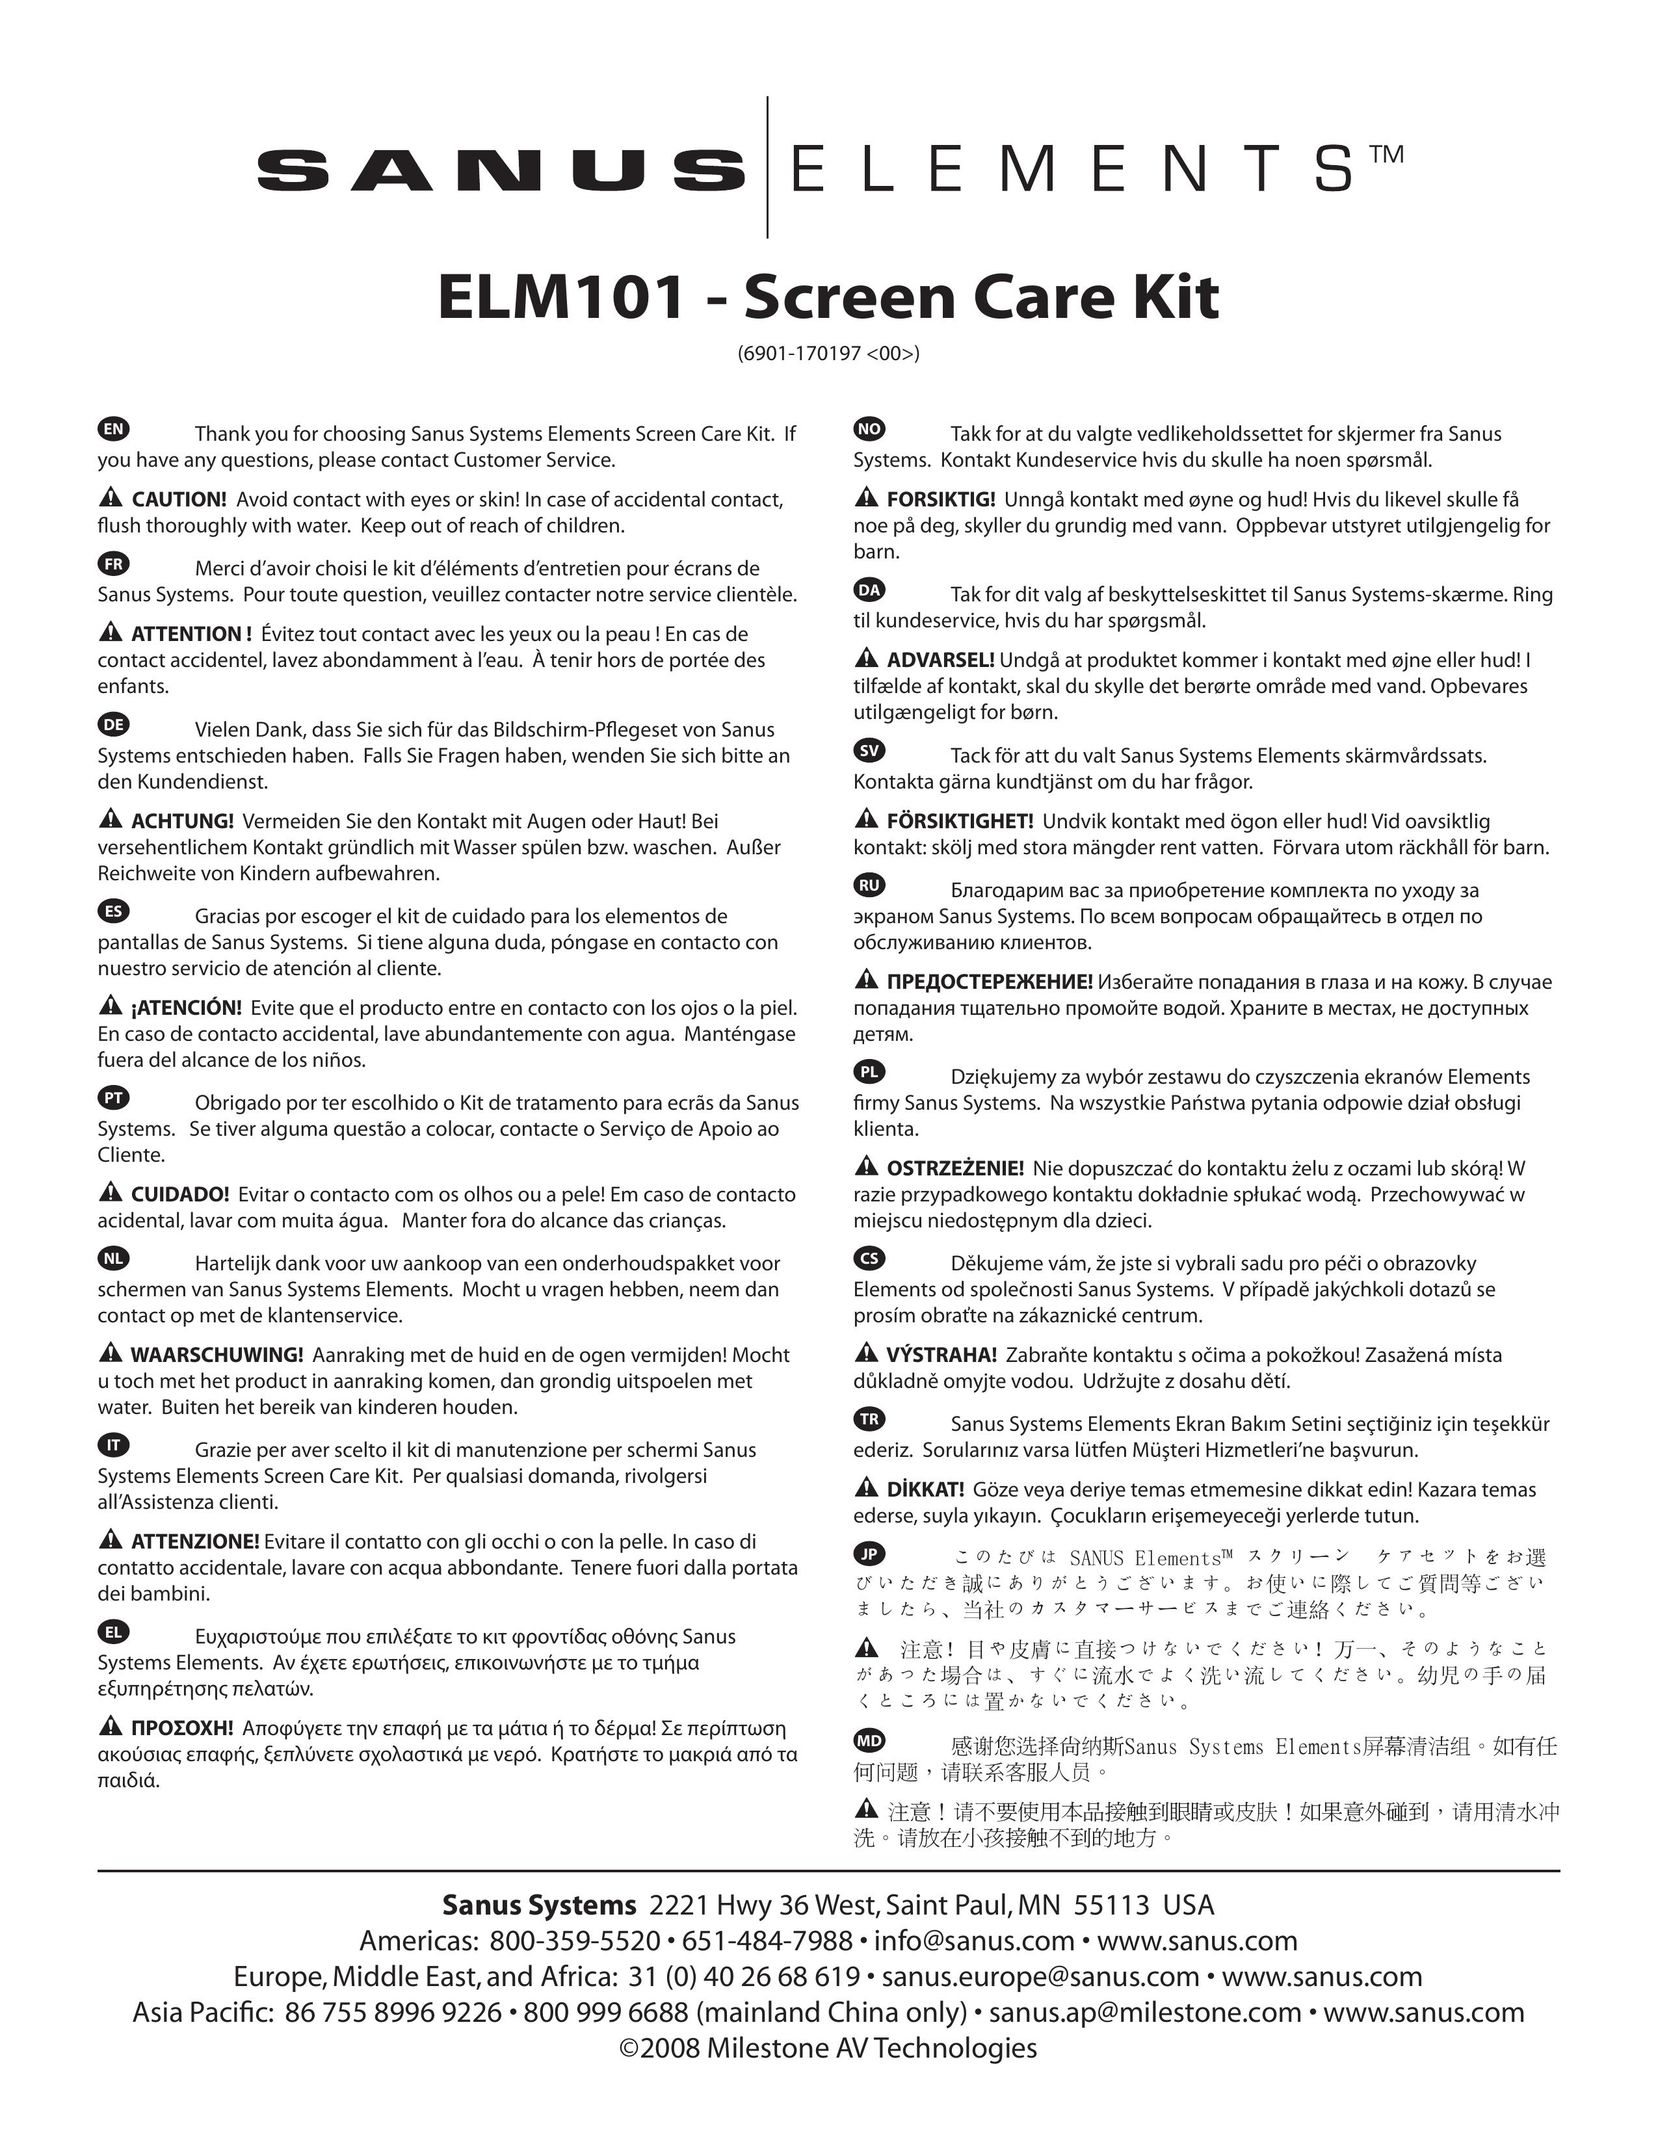 Sanus Systems ELM101 Home Theater Screen User Manual